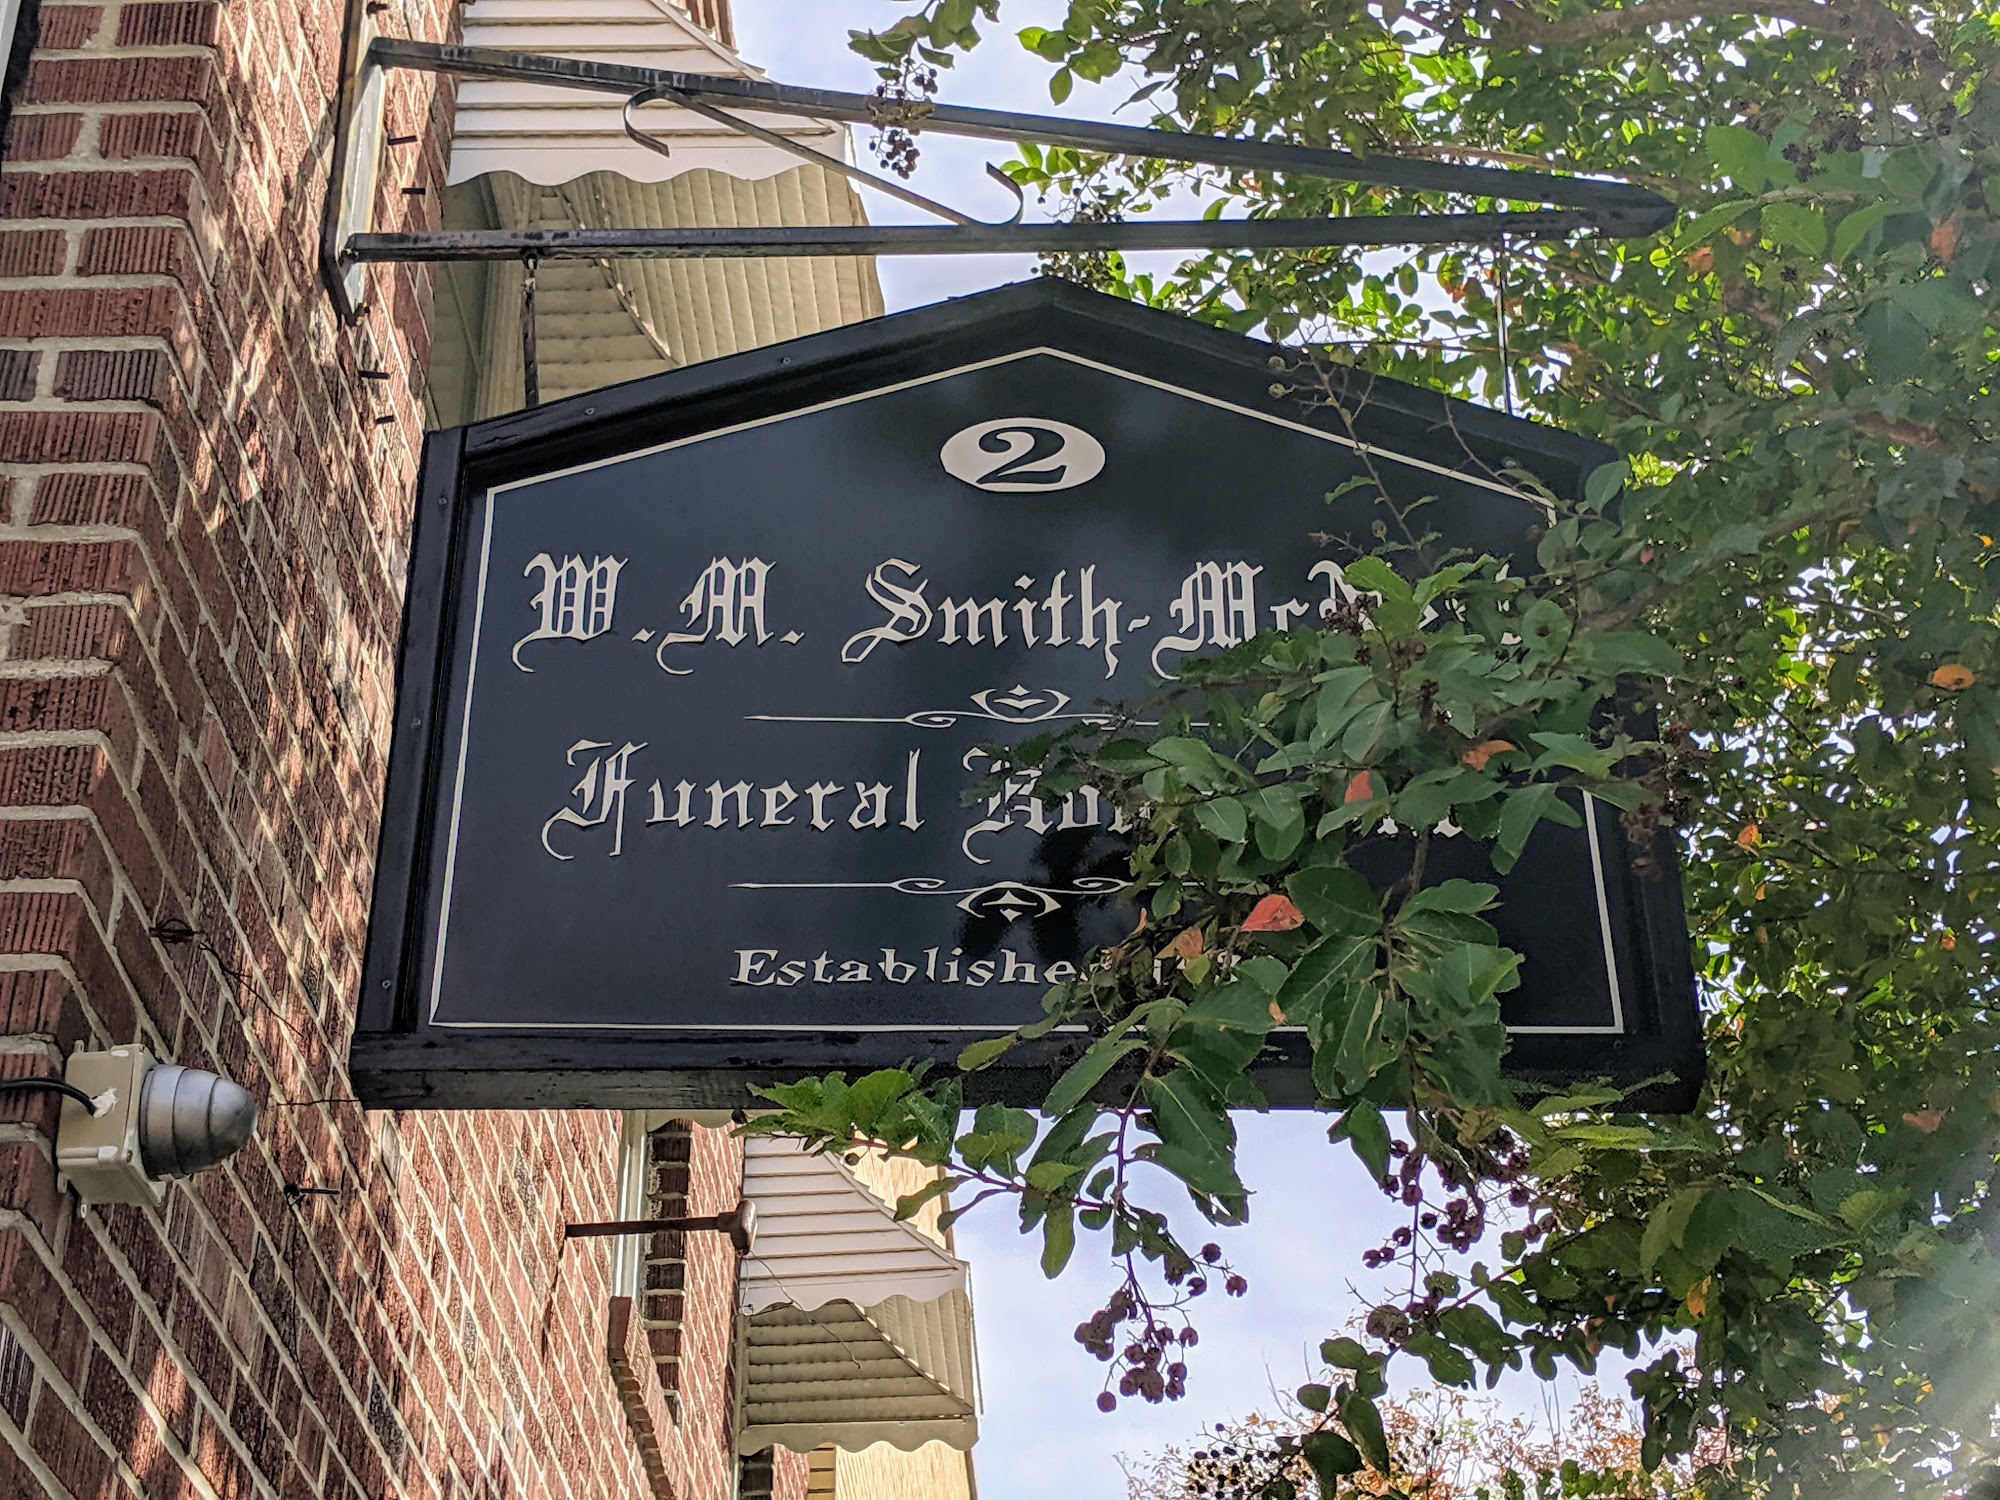 W.M. Smith - McNeal Funeral Homes & Chapels